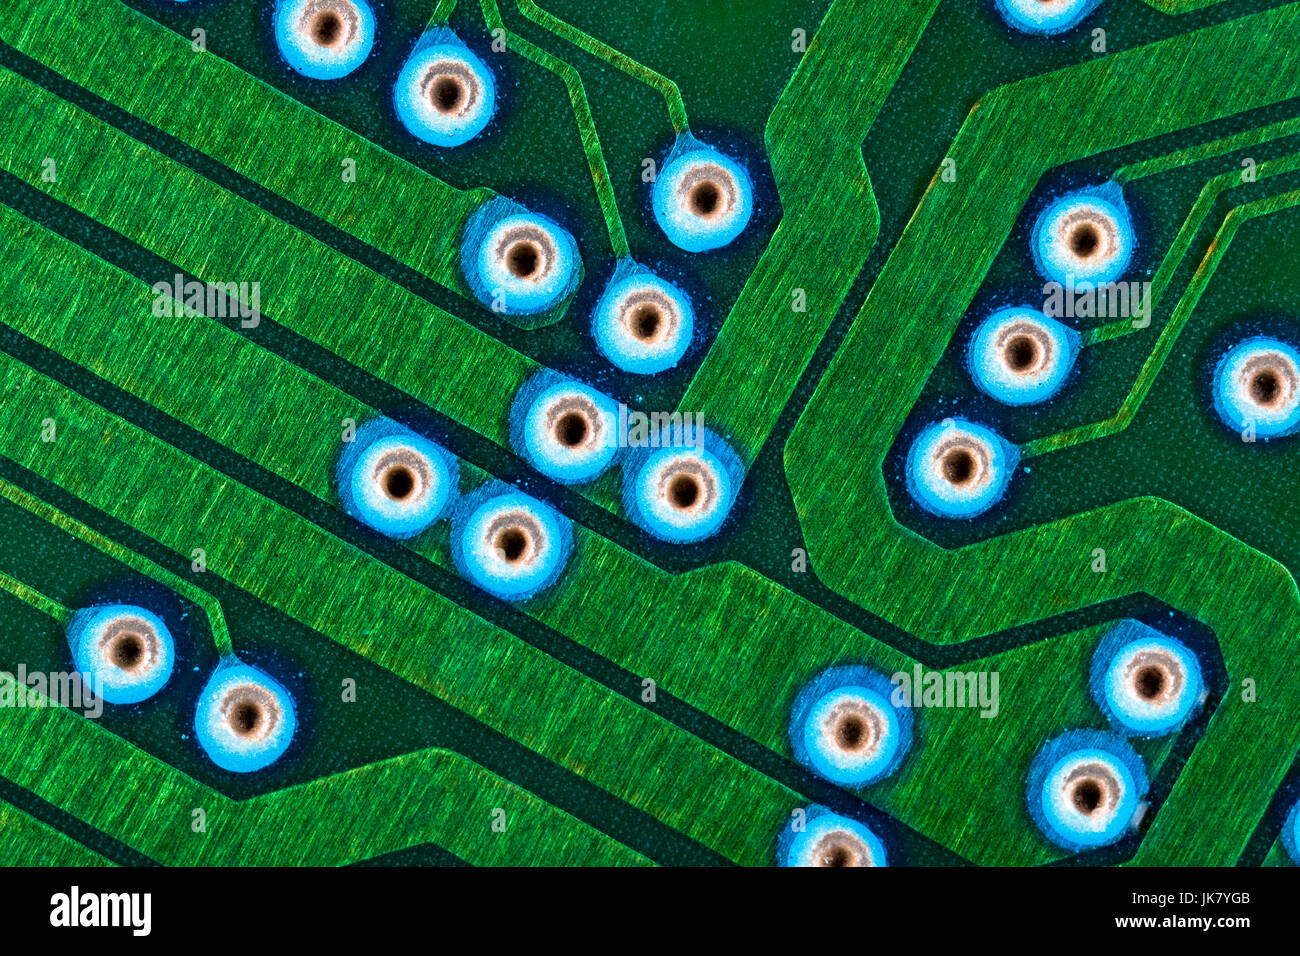 Macro-photo of the connector tracks on green printed circuit board (pcb) with blue dip holes visible. Wiring inside computer, circuit close up detail. Stock Photo